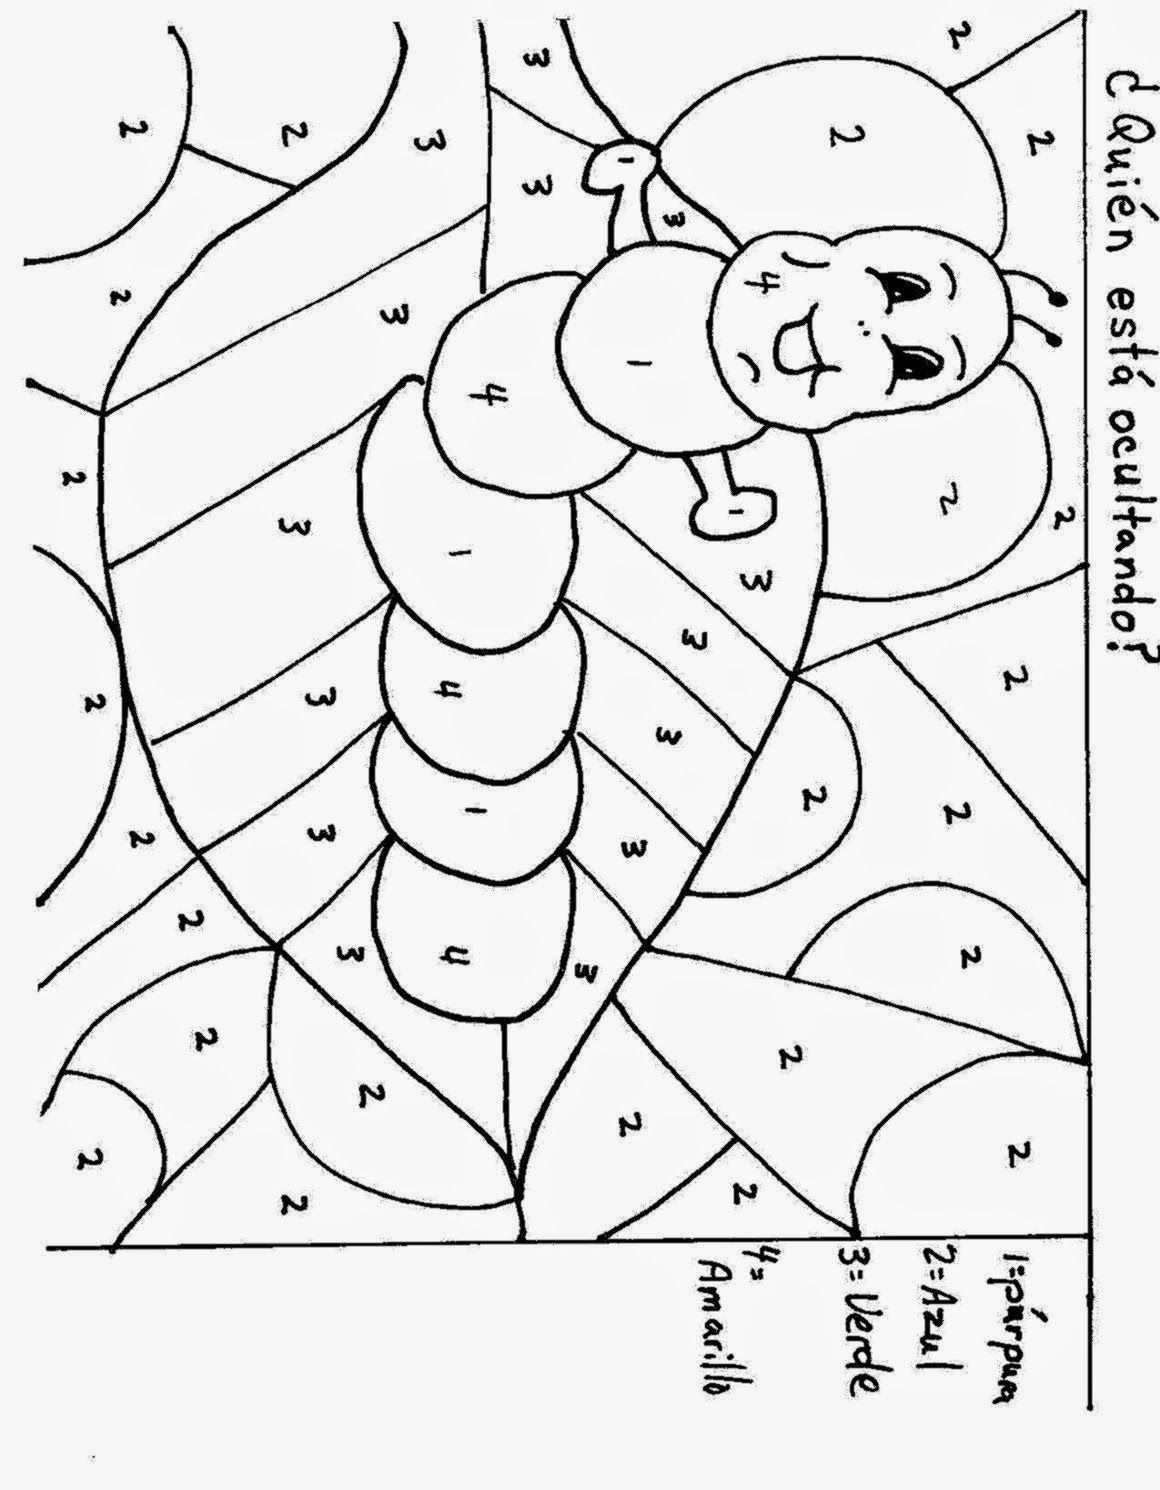 Coloring Pages For Colors In Spanish | Coloring